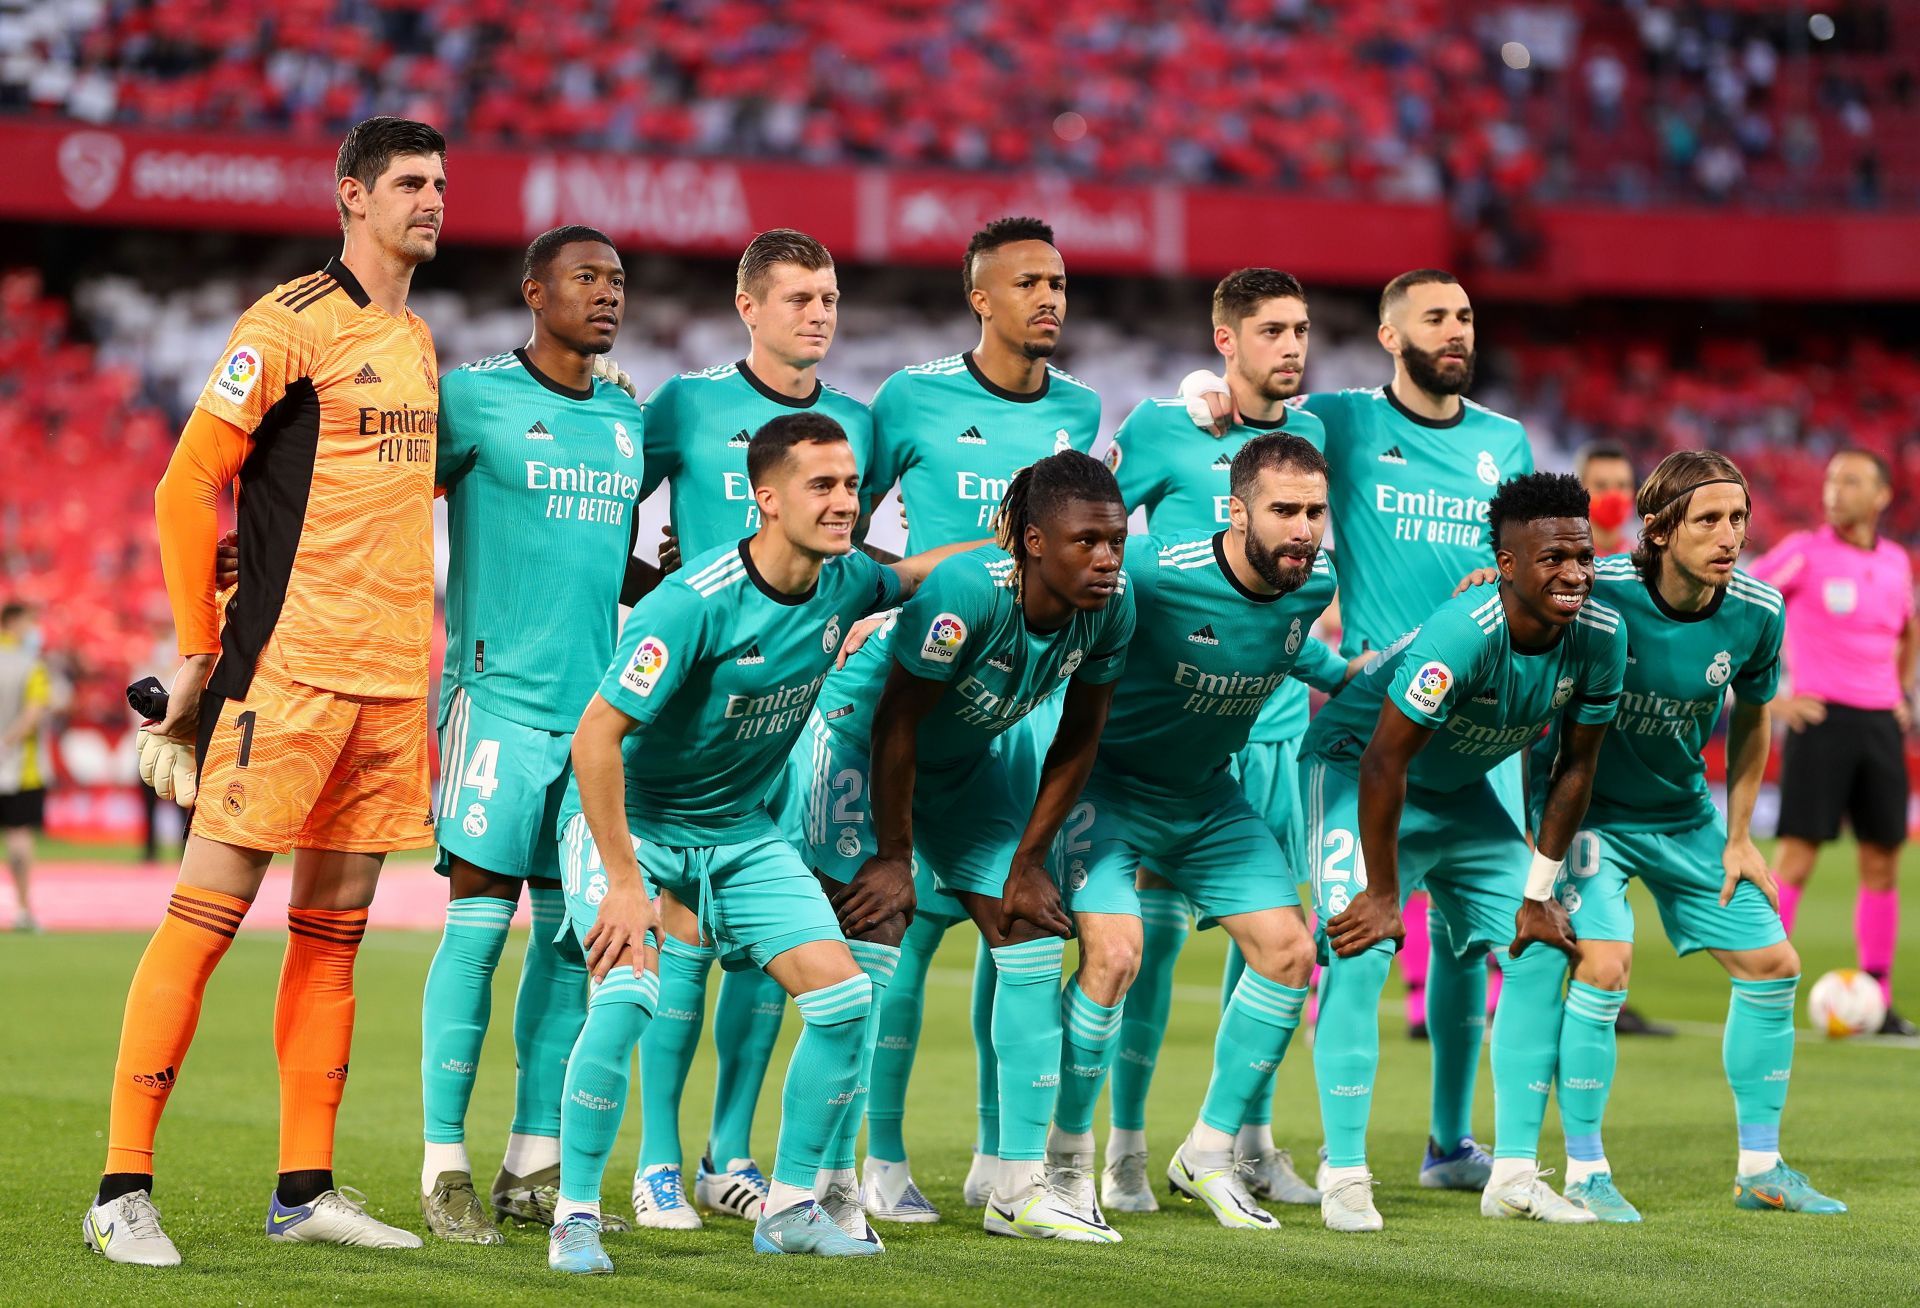 Real Madrid players were absolutely livid after the goal was disallowed.